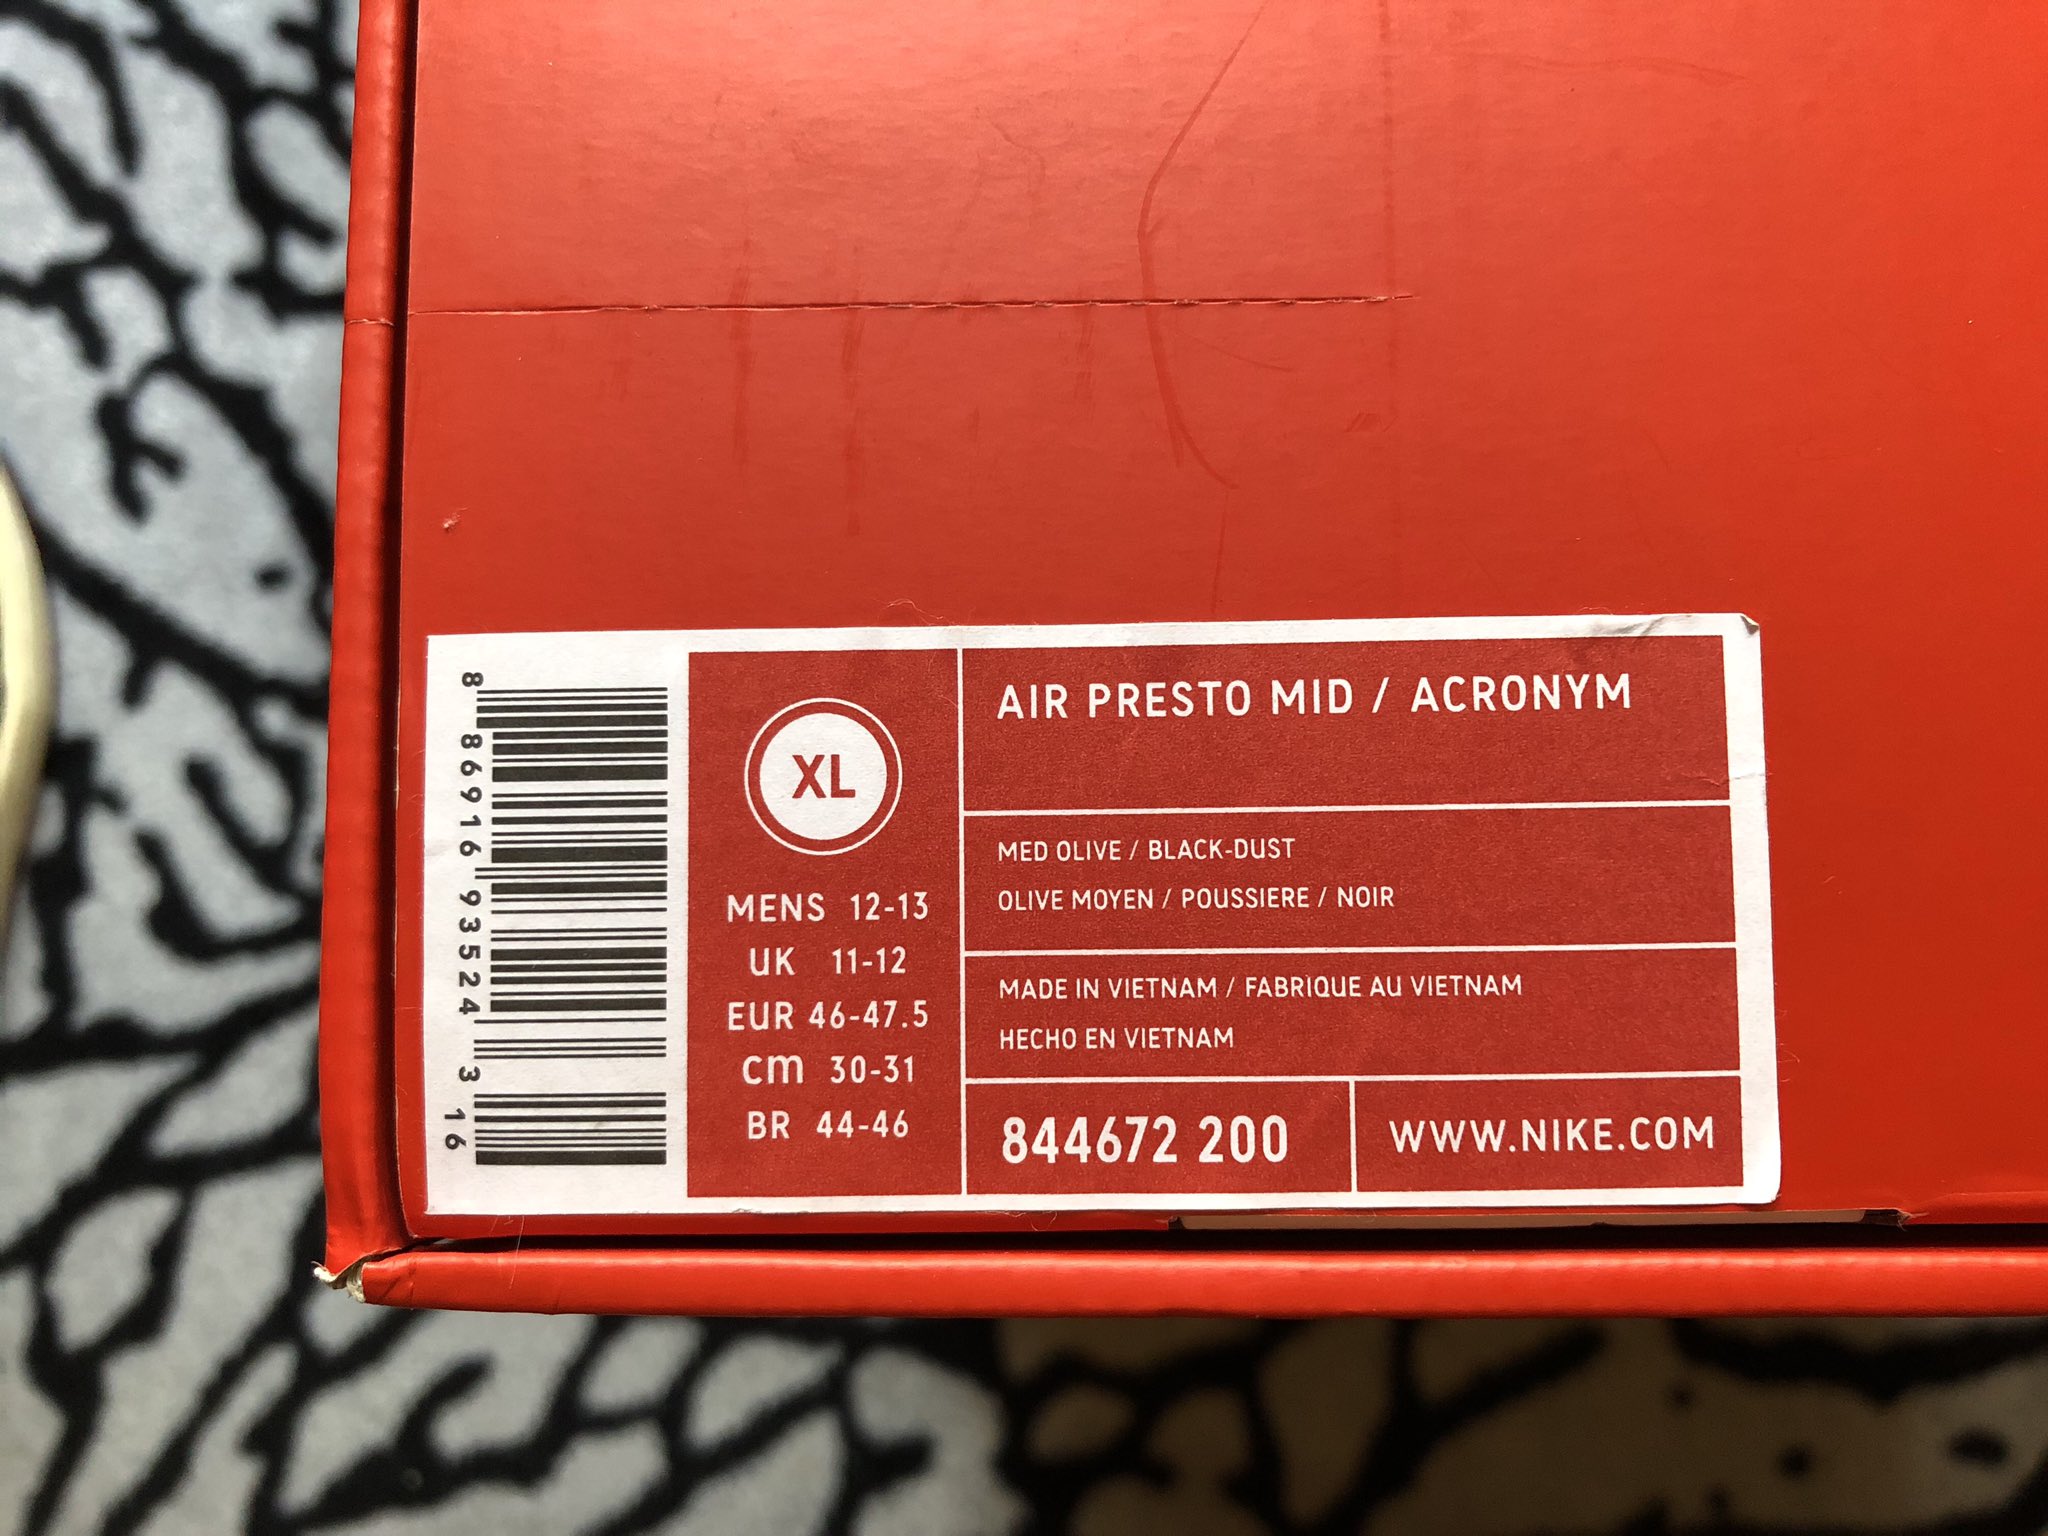 Nike changed the size of Prestos. XL 